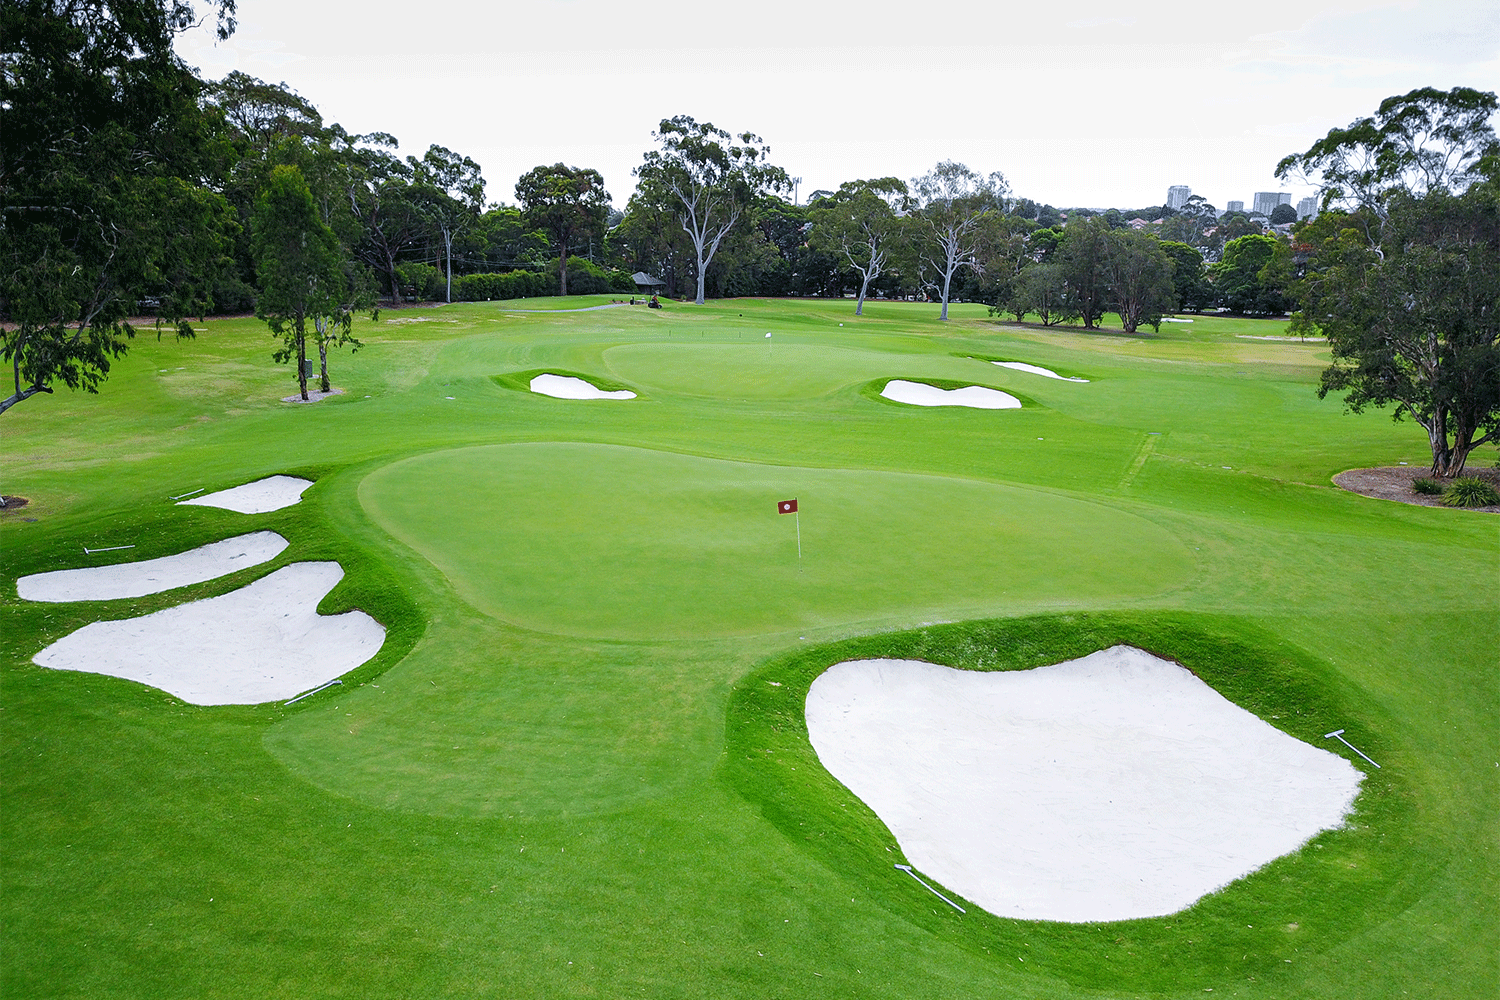 From the 14th tee, the 12th green appears to slide off the rear of the 14th green [right], just one Doak optical illusion at Concord.